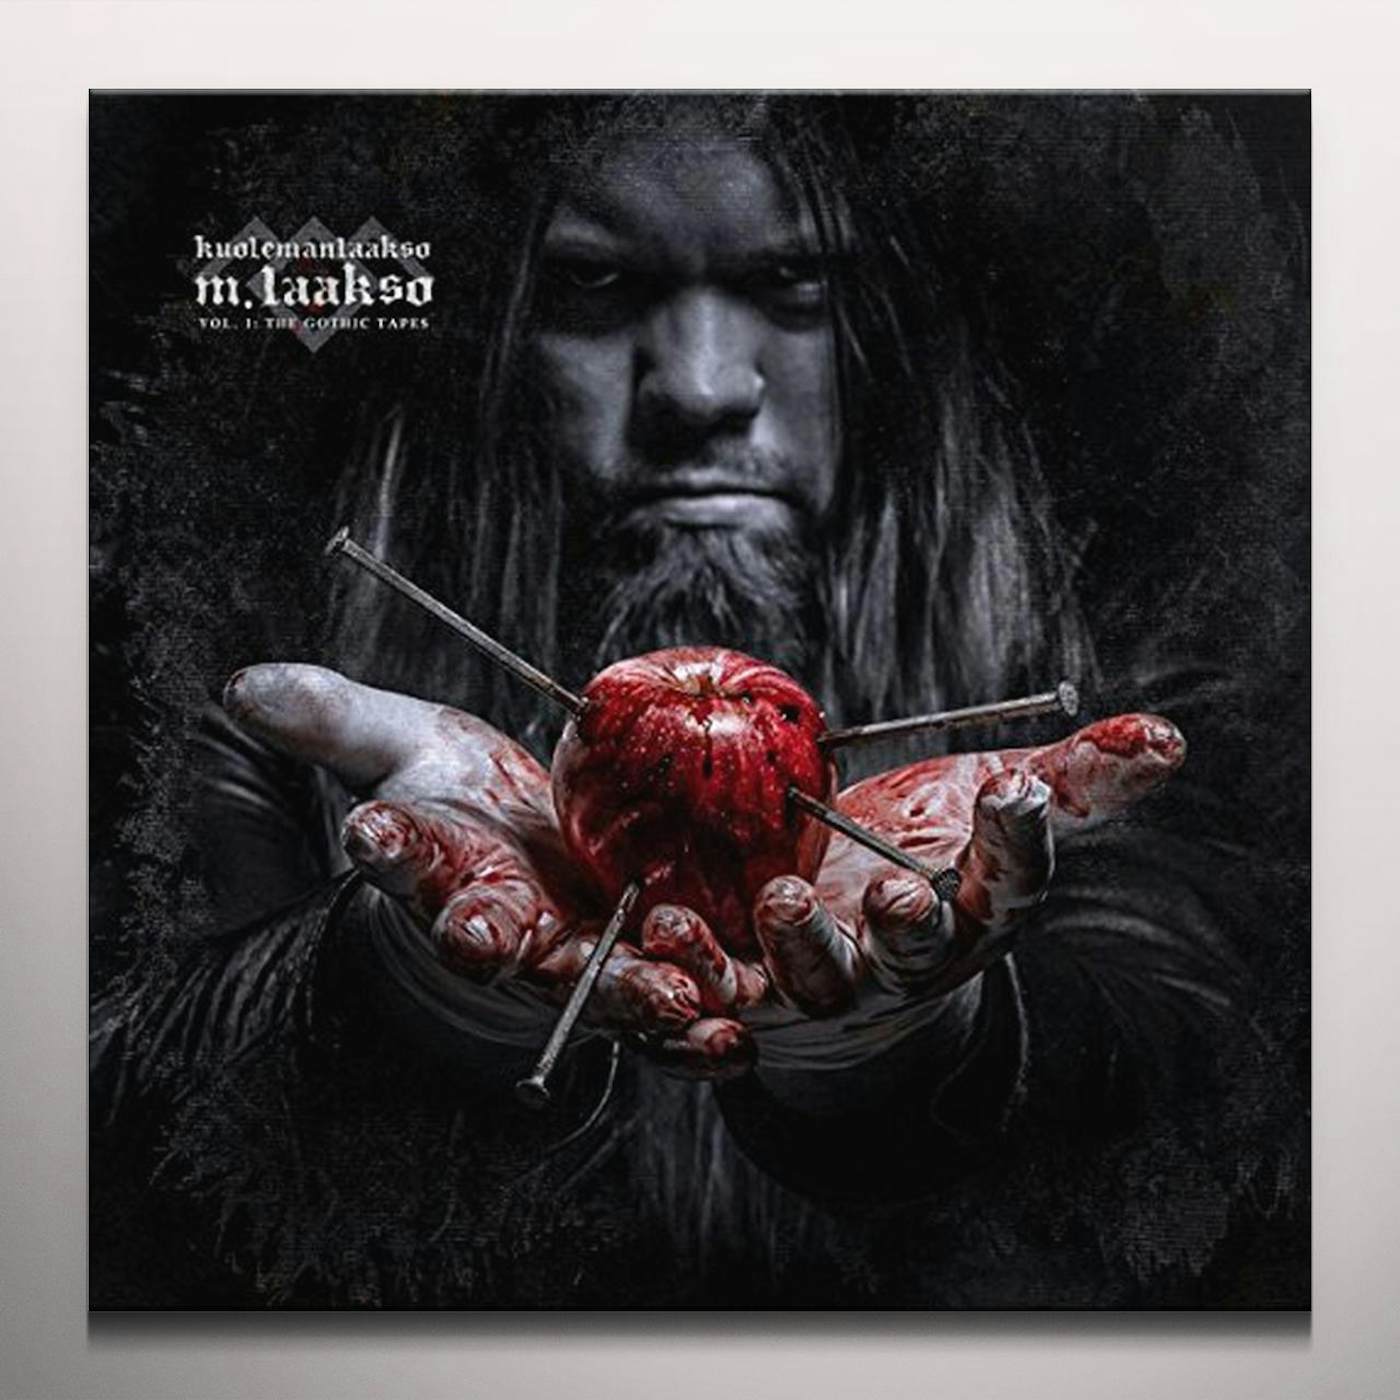 Kuolemanlaakso M LAAKSO: THE GOTHIC TAPES 1 Vinyl Record